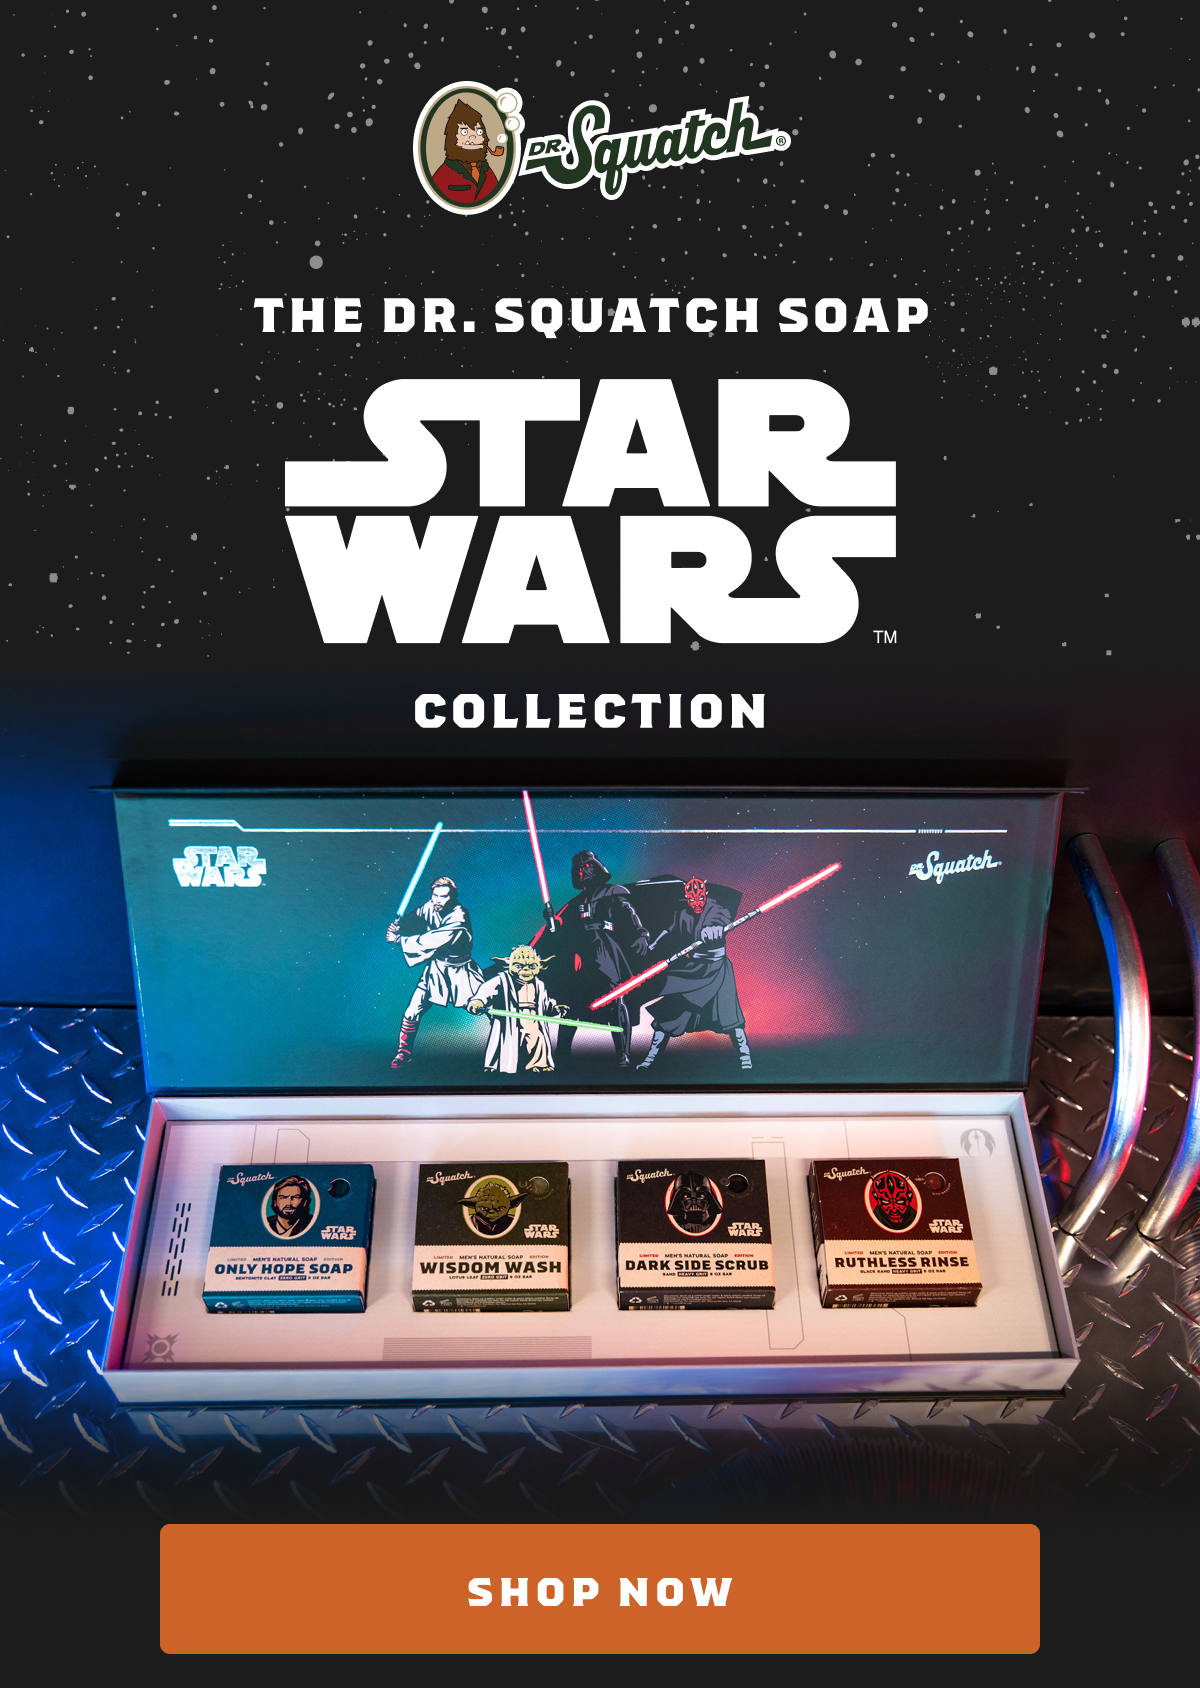 Dr. Squatch: THE DR. SQUATCH SOAP - STAR WARS COLLECTION